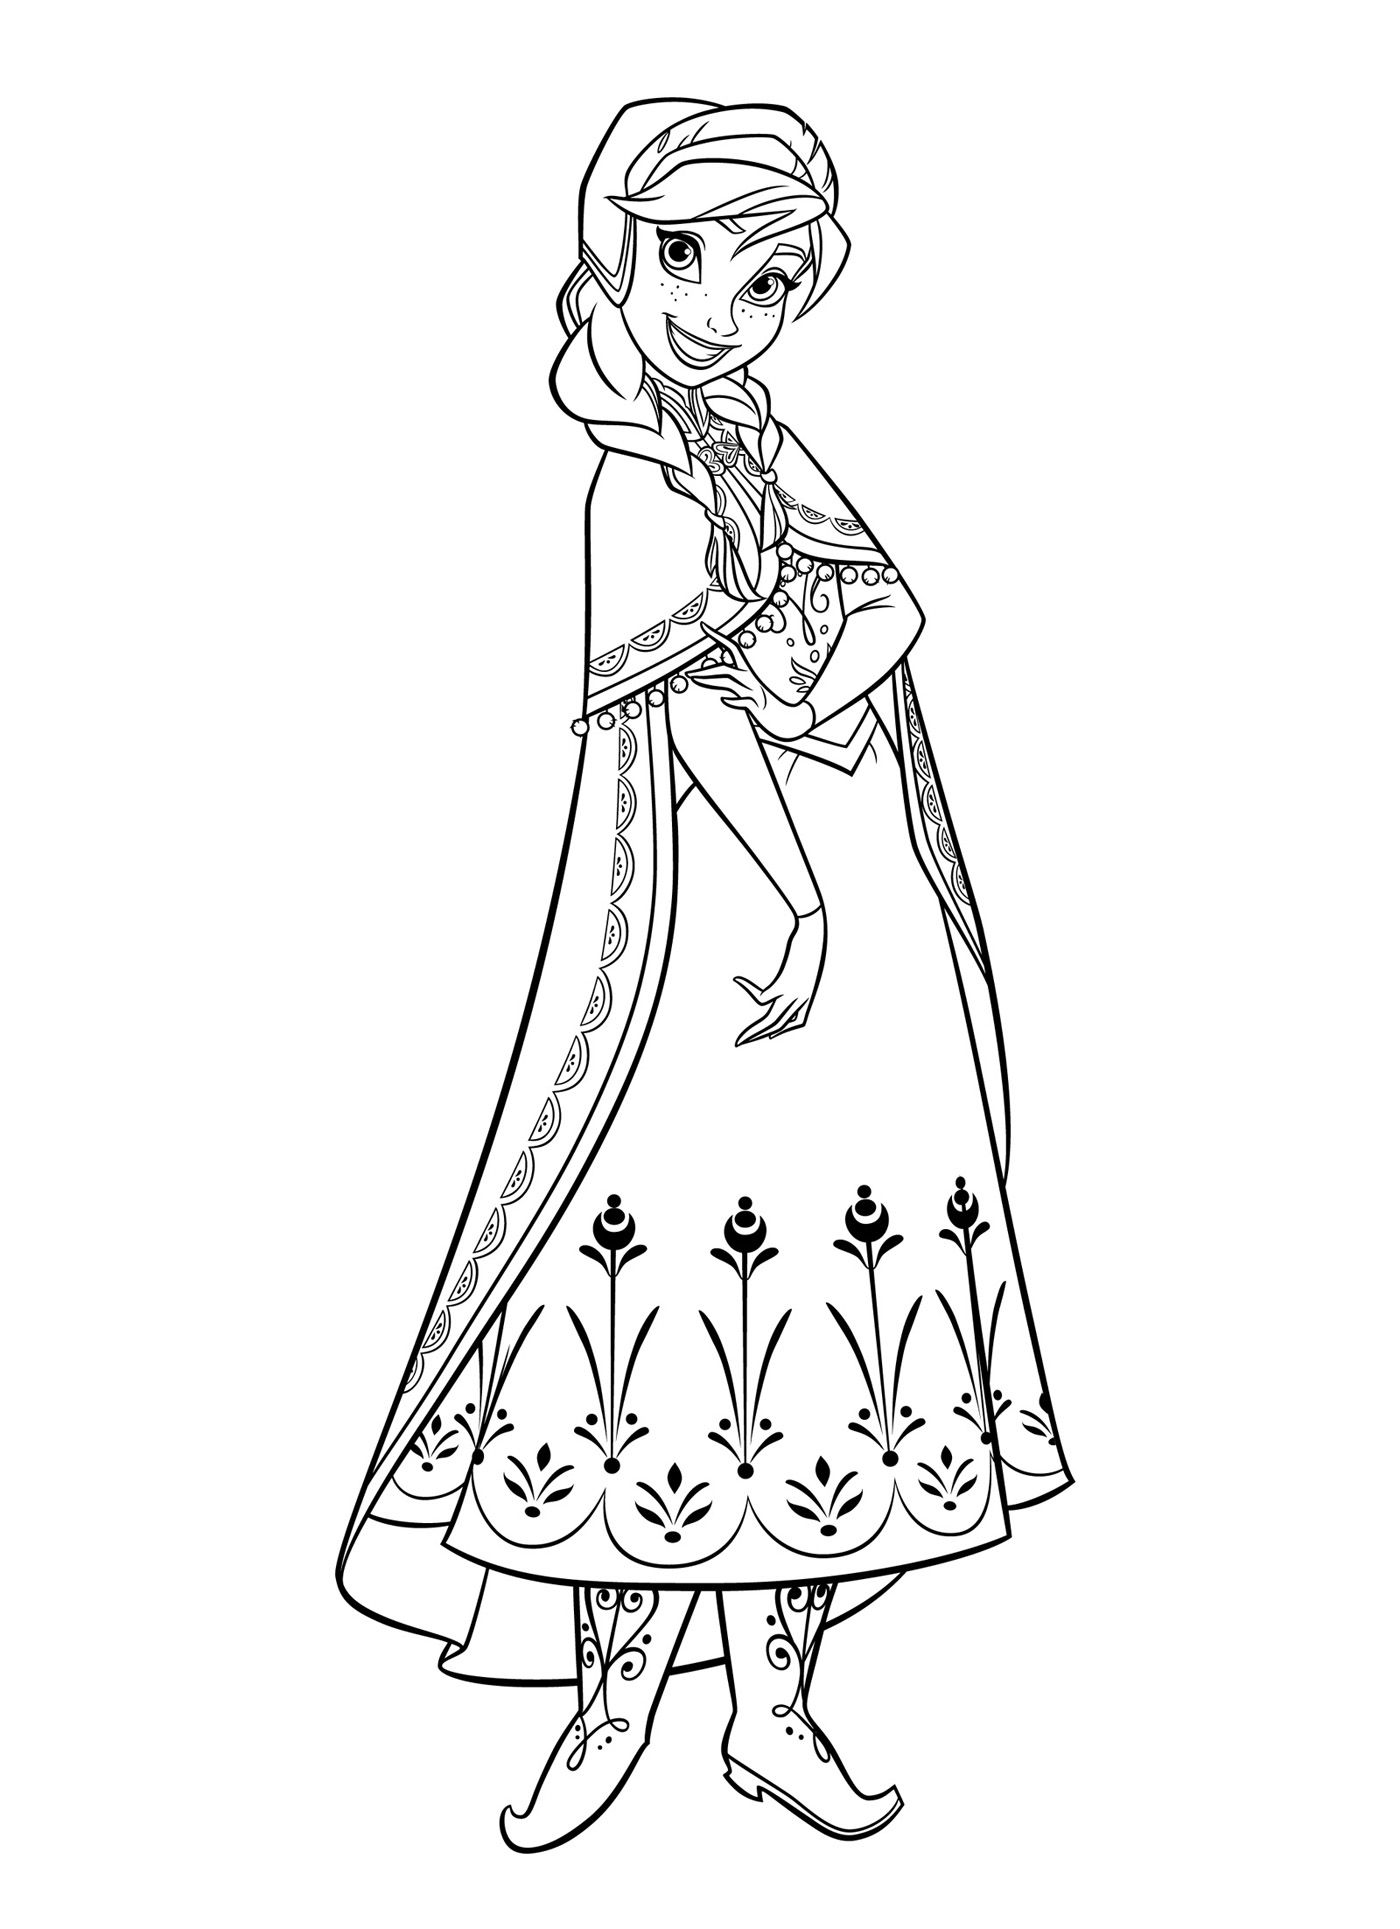 anna from frozen coloring pages